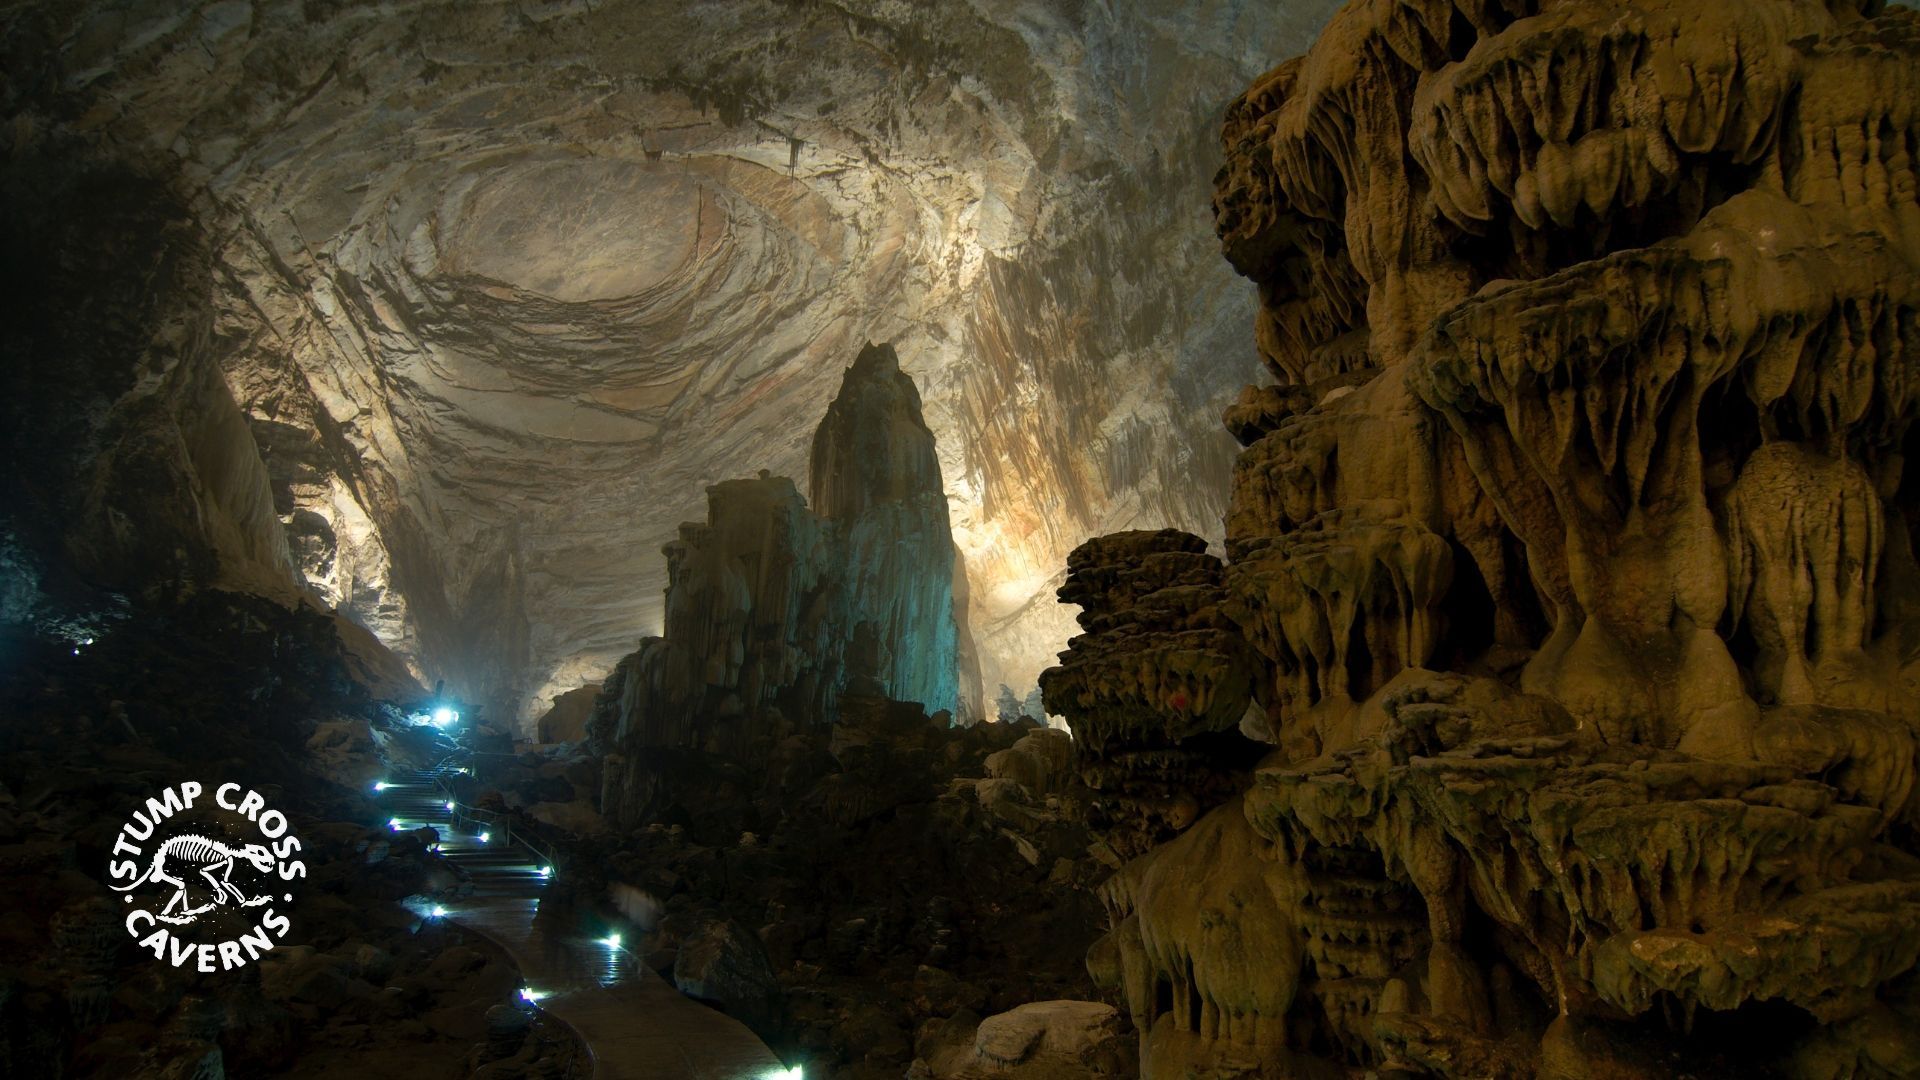 Fancy yourself as a spelunker? Discover the world's most unique, unusual and amazing caves